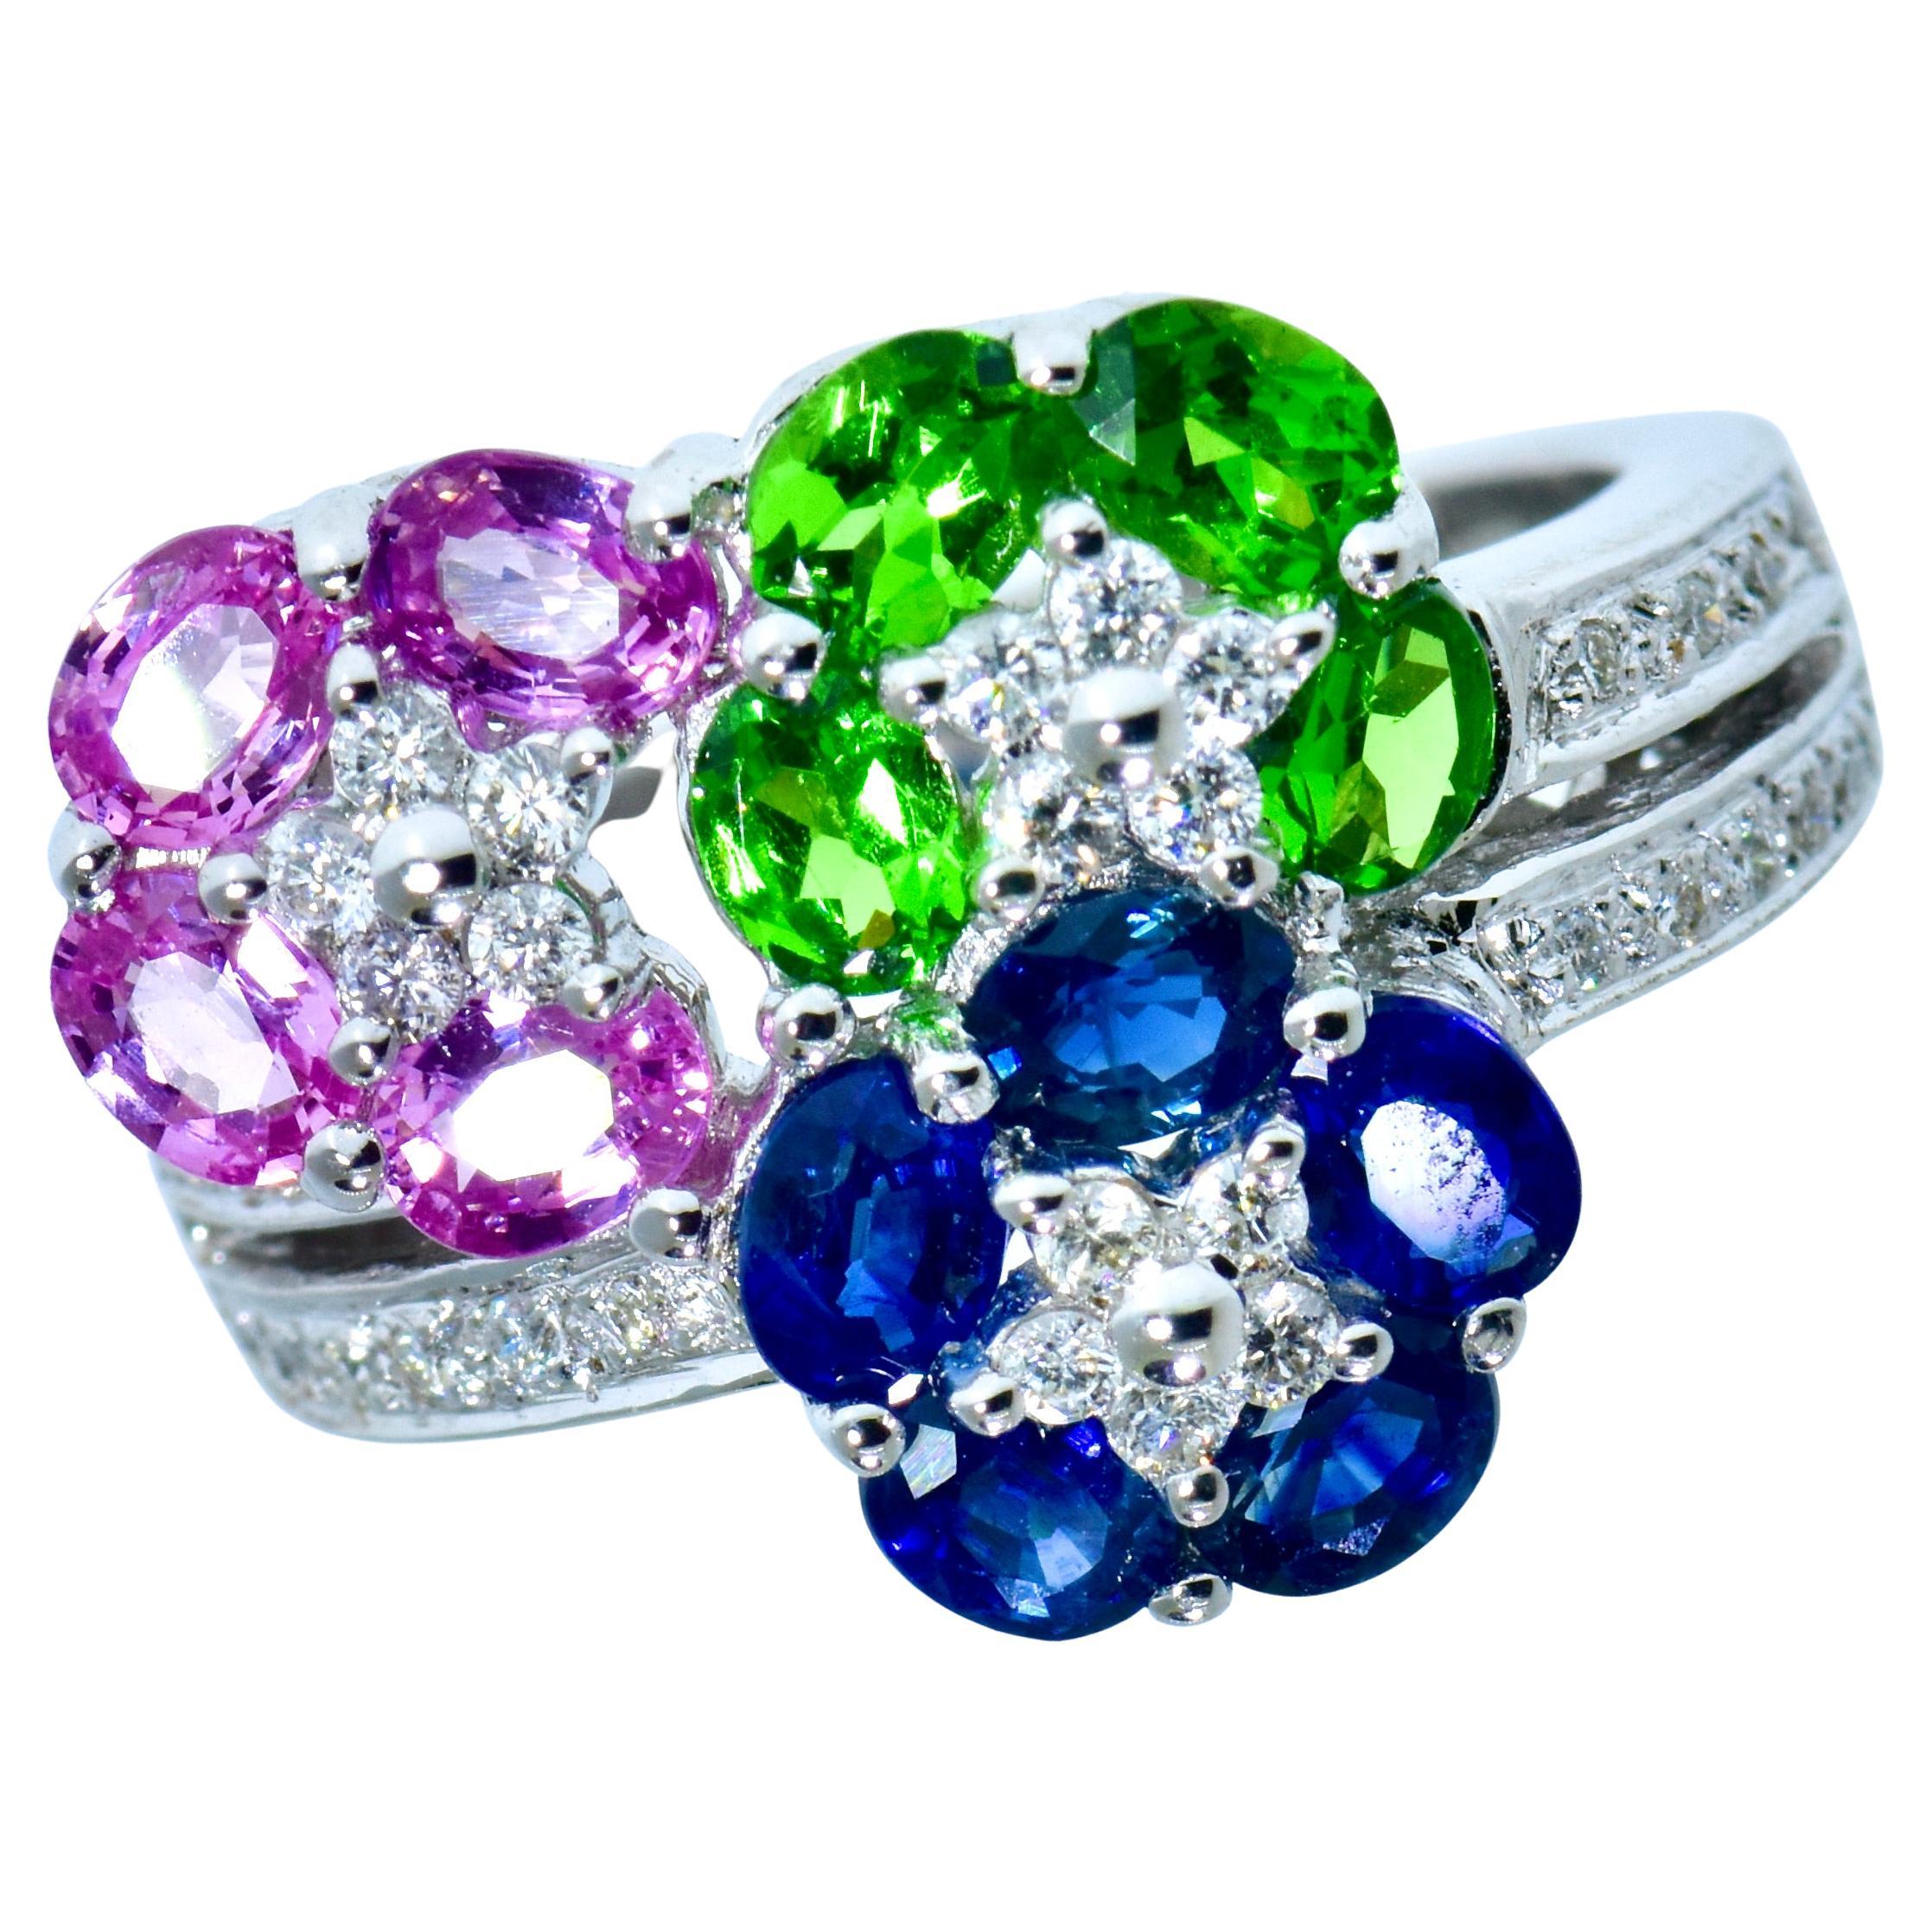 Pink Sapphires, Blue Sapphires and bright green Tsavorites with white brilliant cut diamonds all create a very fine contemporary ring by the famous firm of LeVian.  The  fine bright and clean oval cut sapphires (both pink and blue), weigh totally an